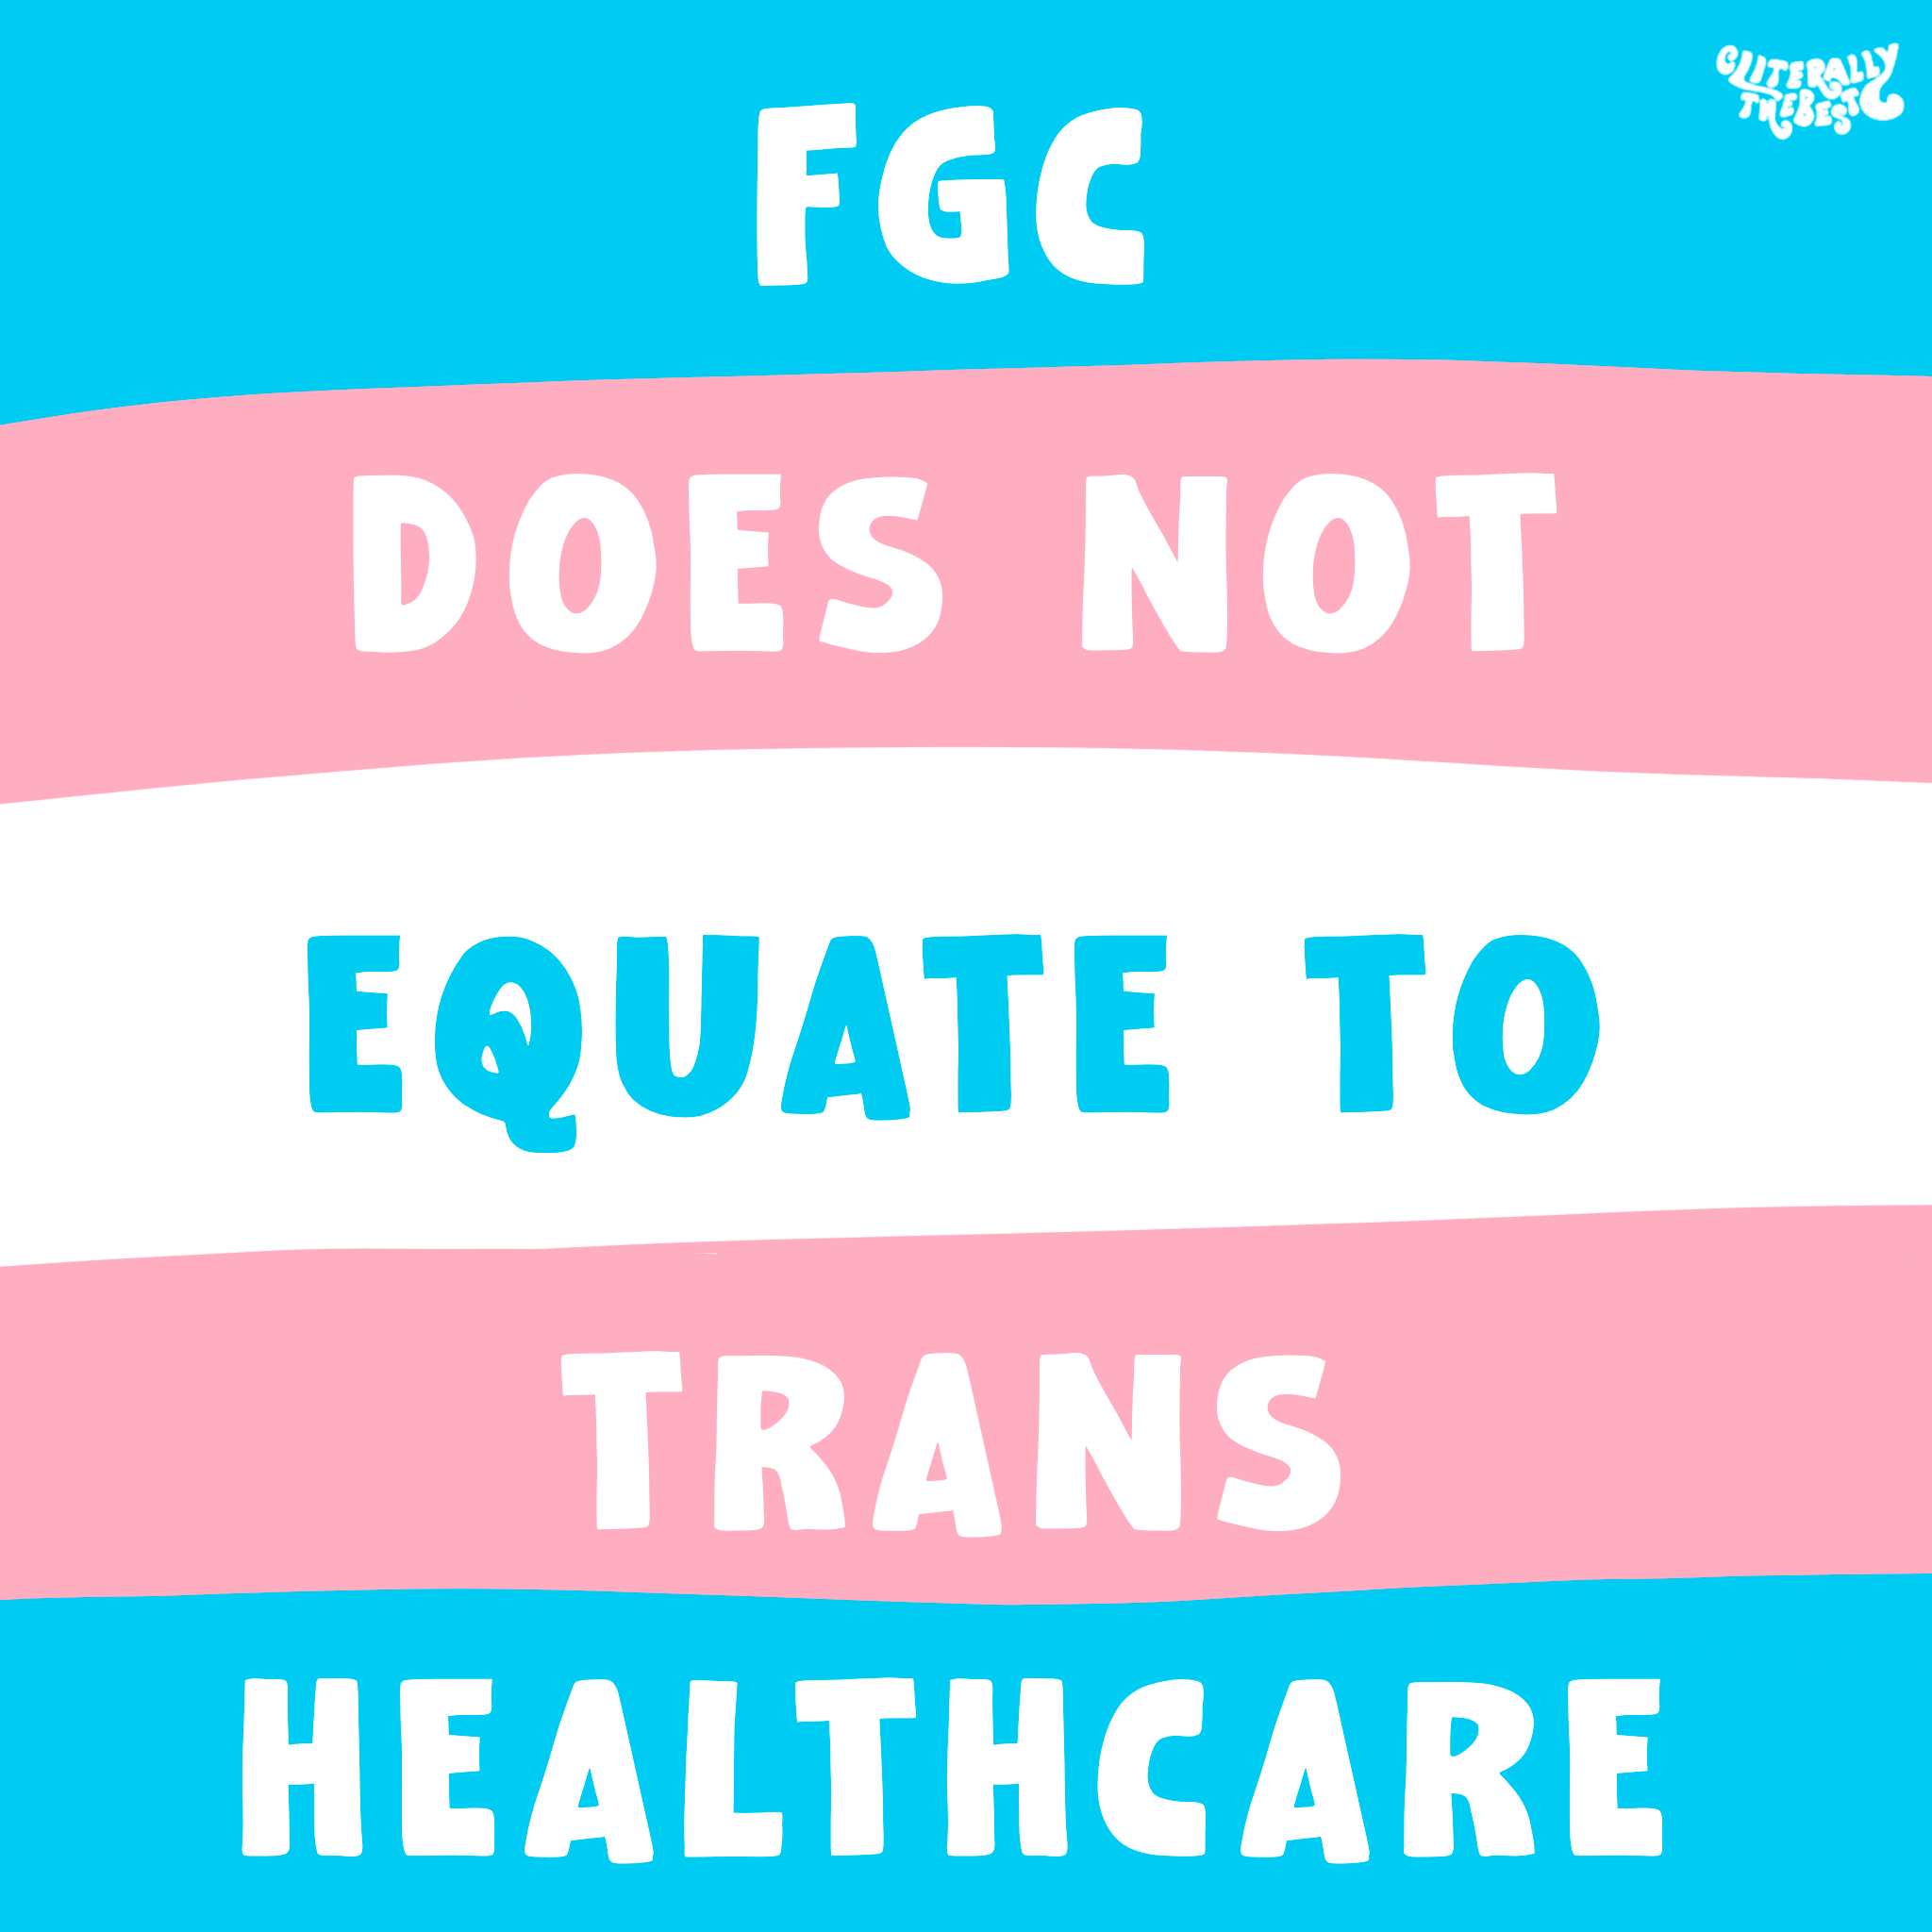 FGM/FGC does not equate to trans healthcare